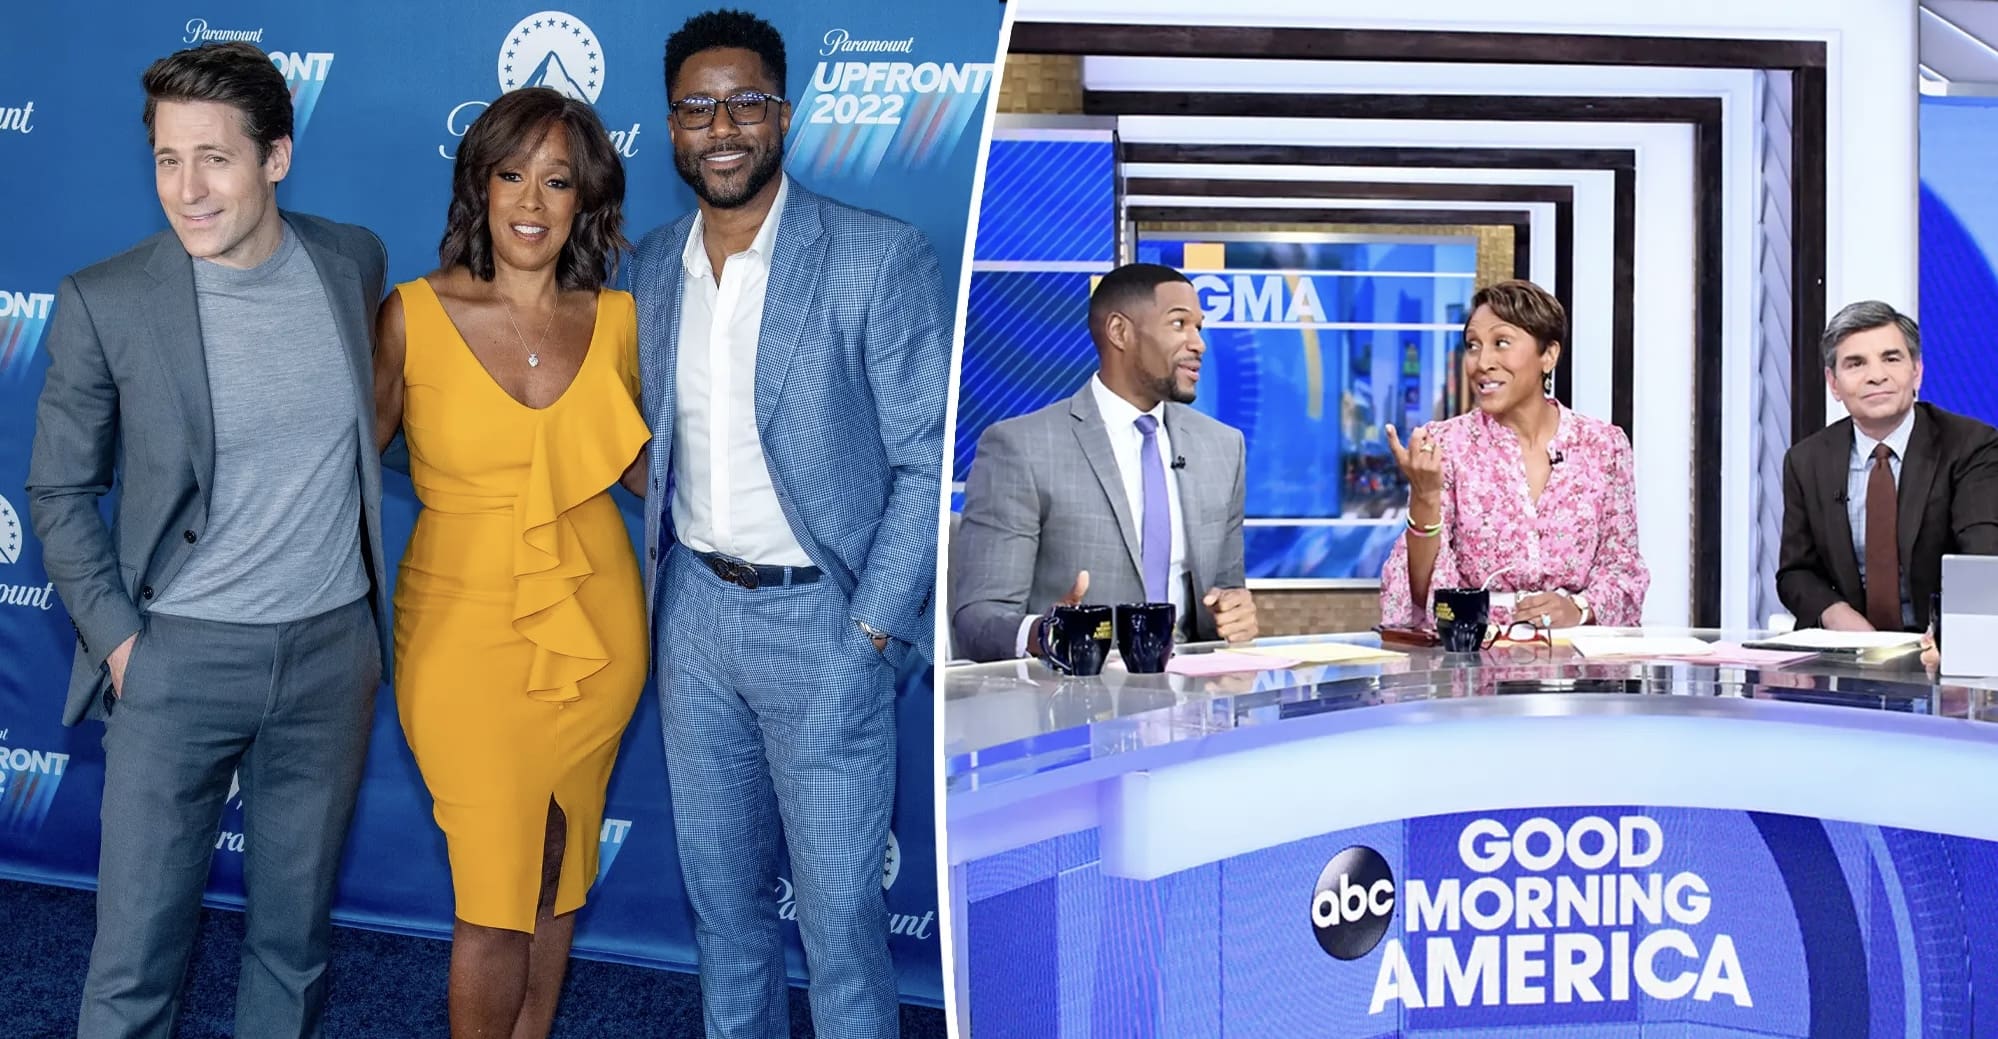 Report: ABC News in Turmoil as ‘CBS Mornings’ Crows Over Ratings Wins Against ‘Good Morning America’